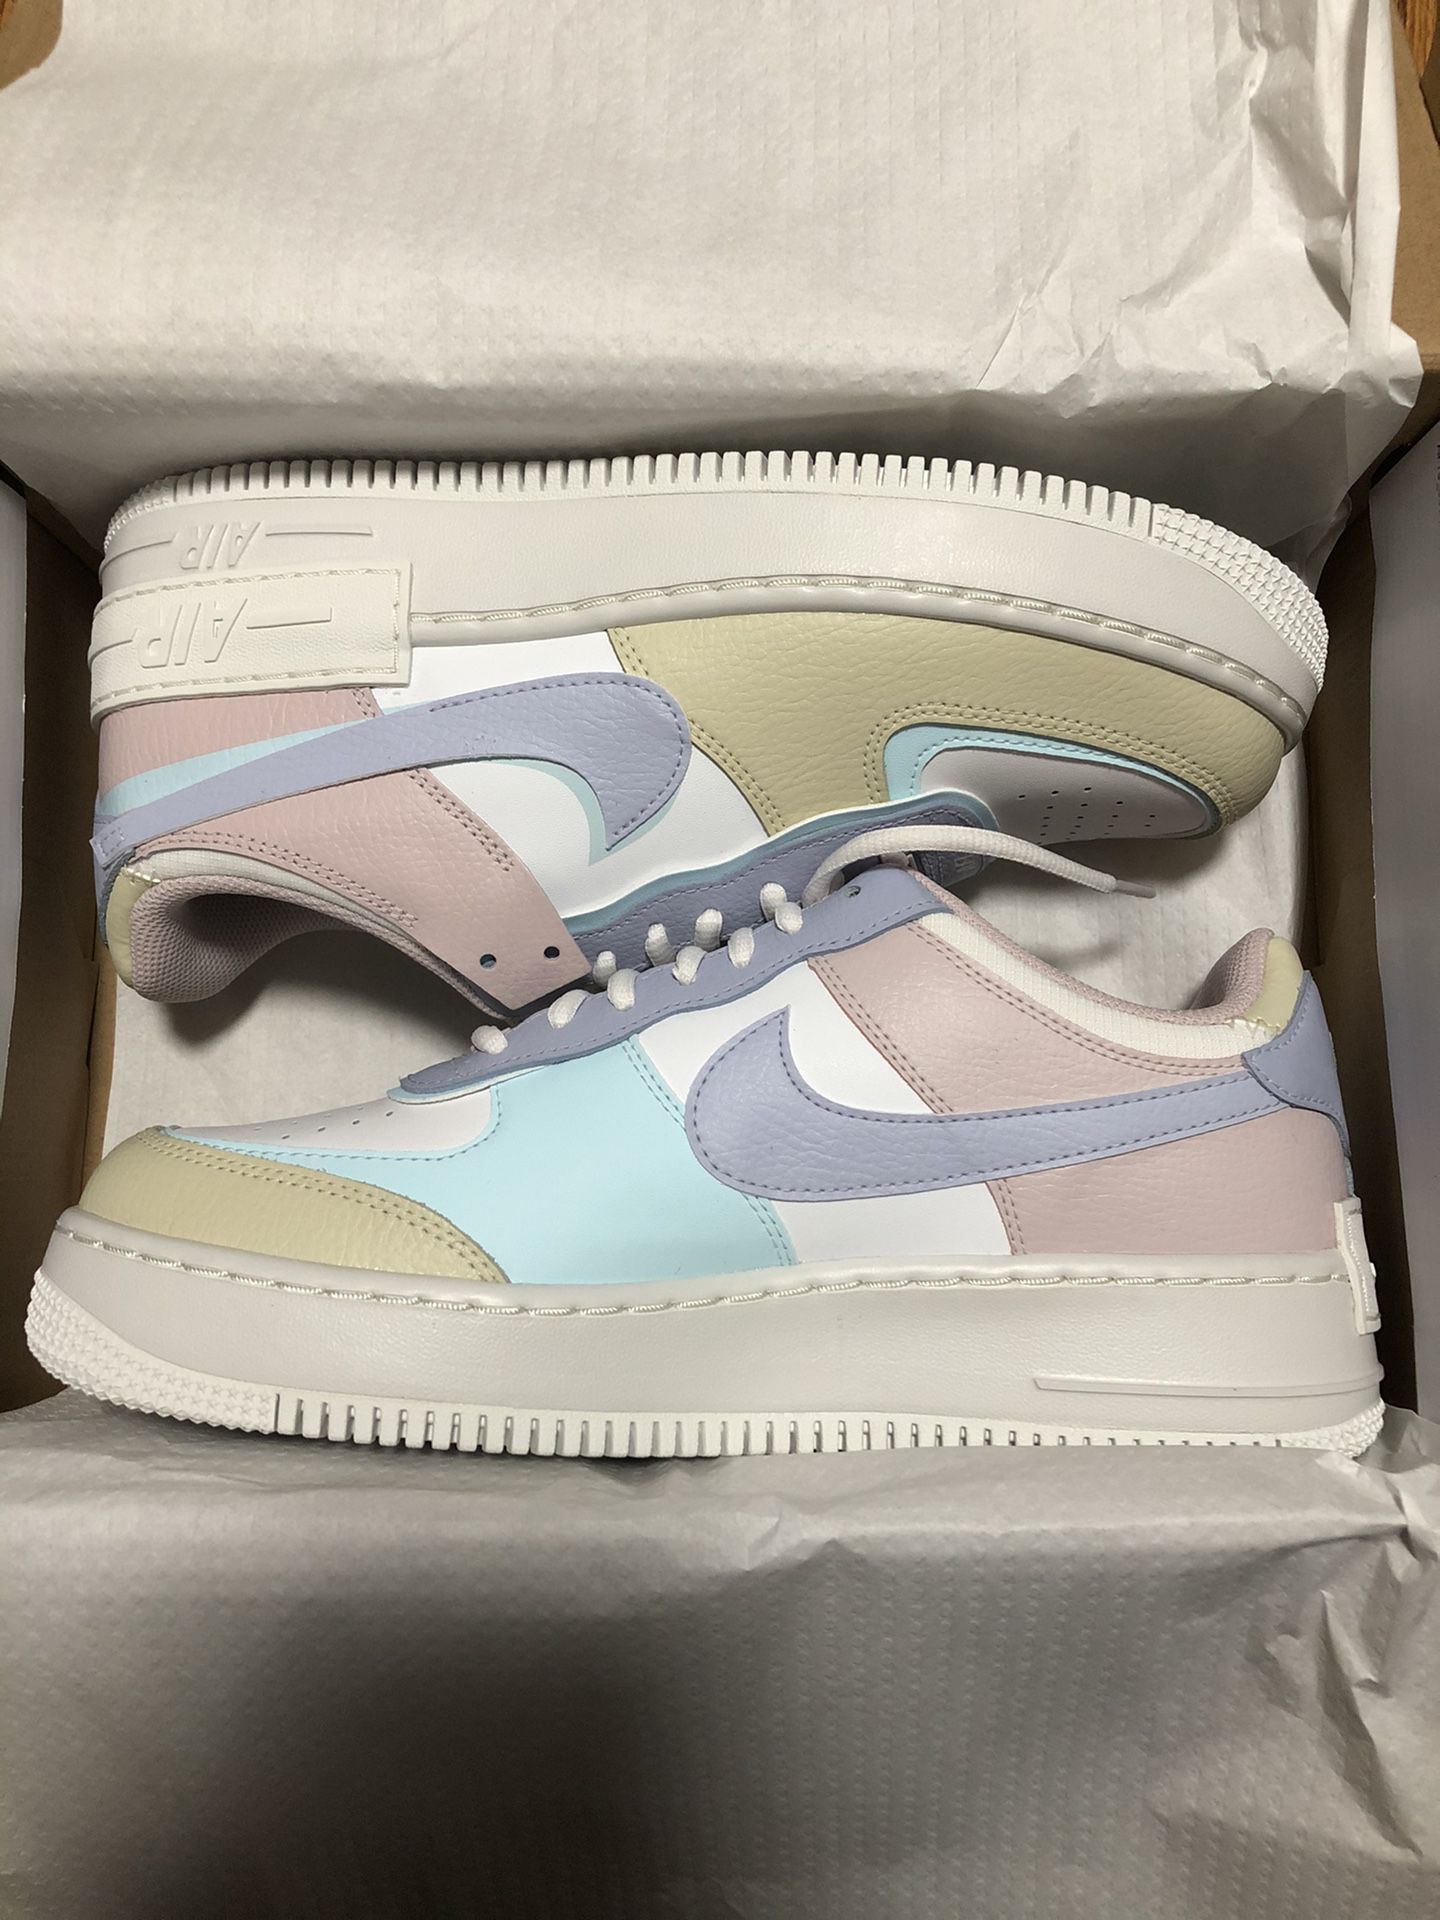 Nike Air Force 1 Shadow Pastel size 9.5M. Brand New Deadstock. (PAYPAL ONLY)